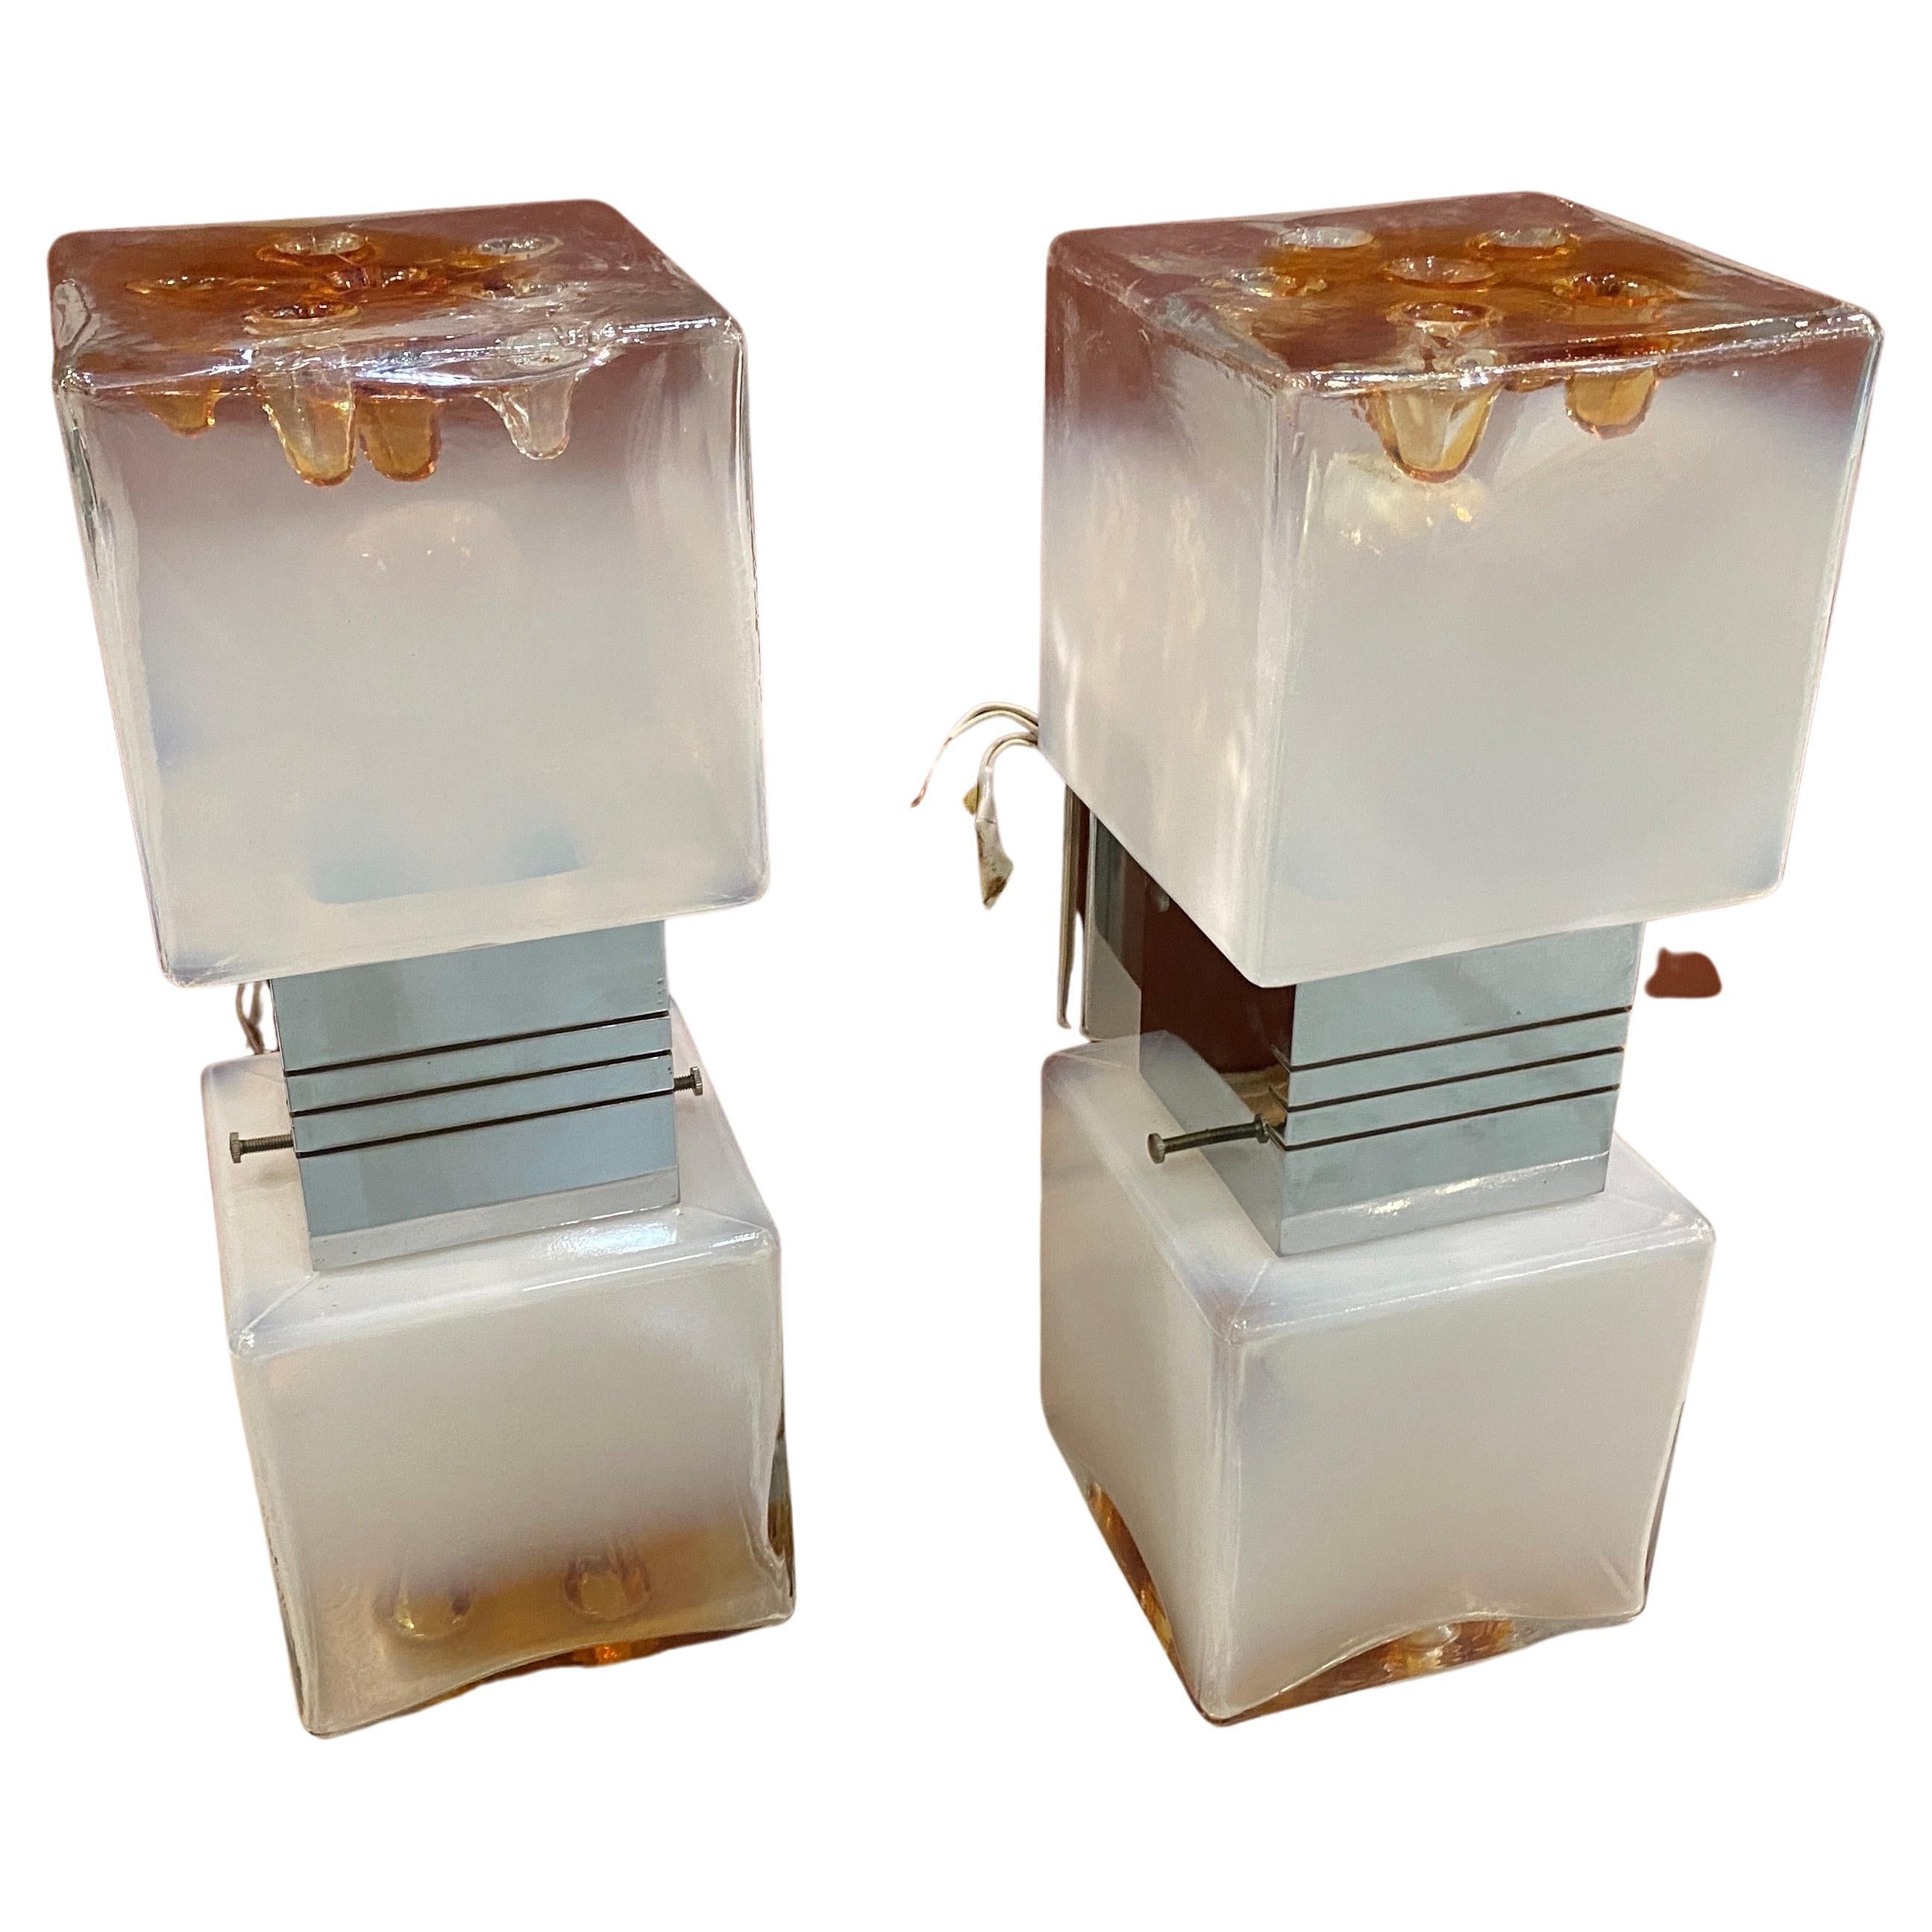 An amazing set of two double cubic wall sconces designed by Gaetano Sciolari and manufactured in Italy in the Seventies. White and Brown murano glasses are in perfect conditions. the chromed metal parts have not any rust. They work both 110-240